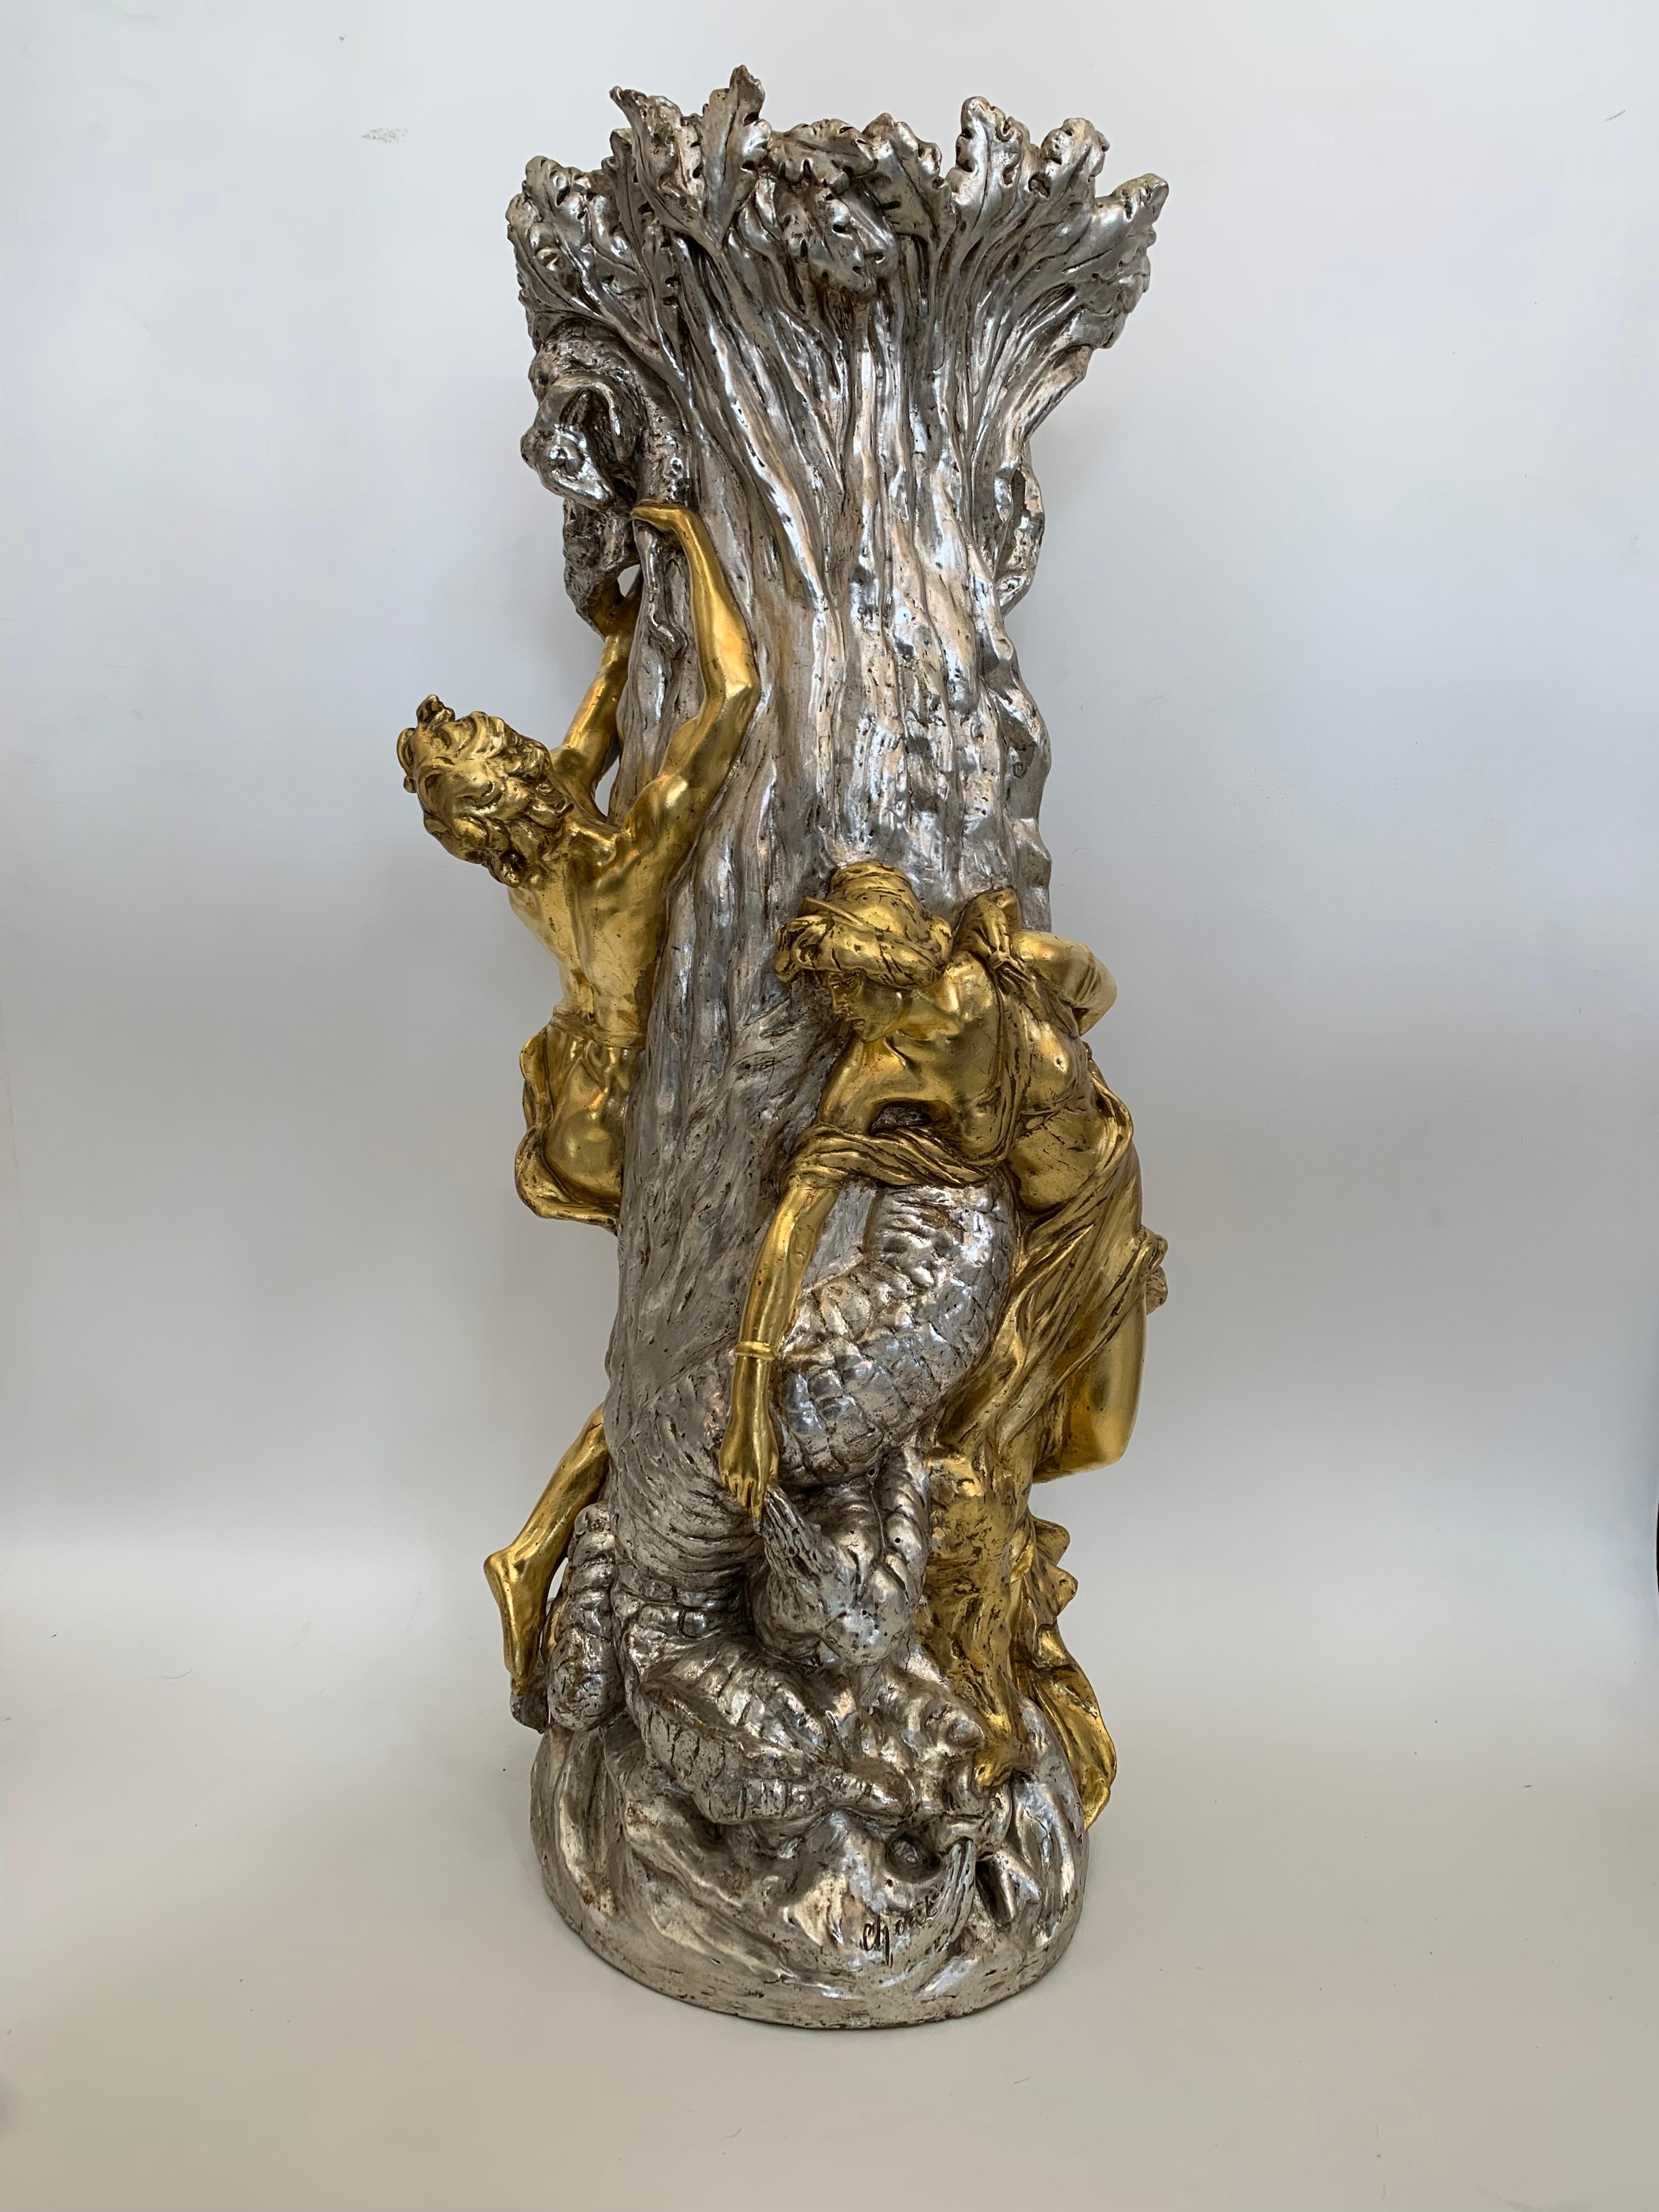 Piece unique of large size with mythological motif, terracotta with gold and silver leaf finish.